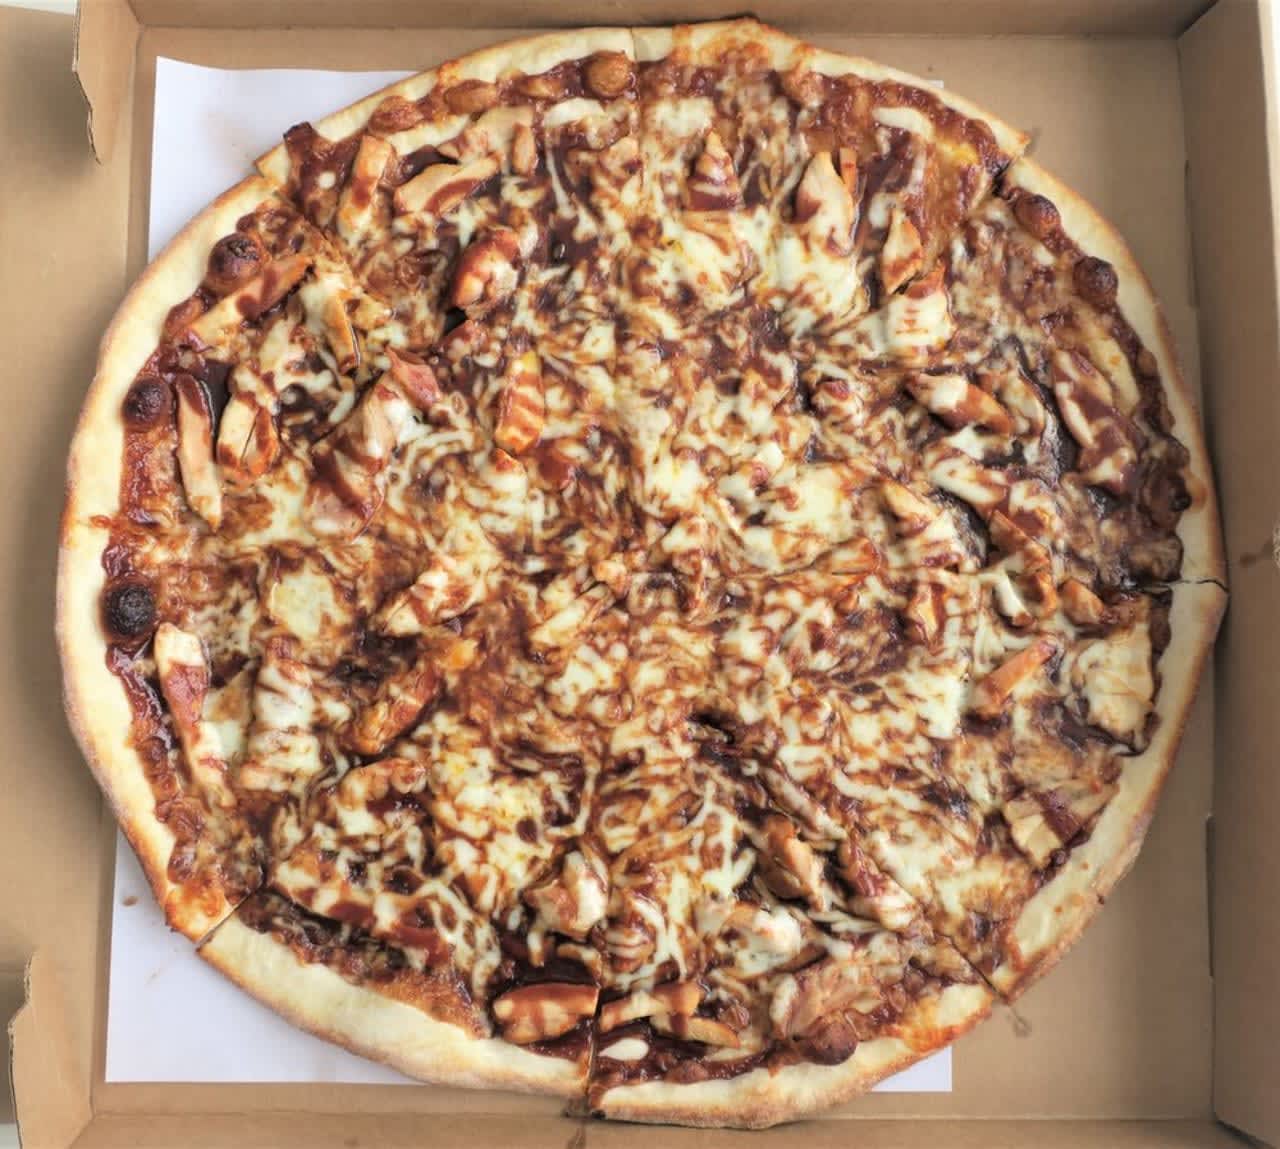 BBQ Chicken Pizza with breaded chicken, mozzarella cheese and tangy BBQ sauce from Bob’s Thin Crust Pizza (83 Old Tappan Road in Tappan)